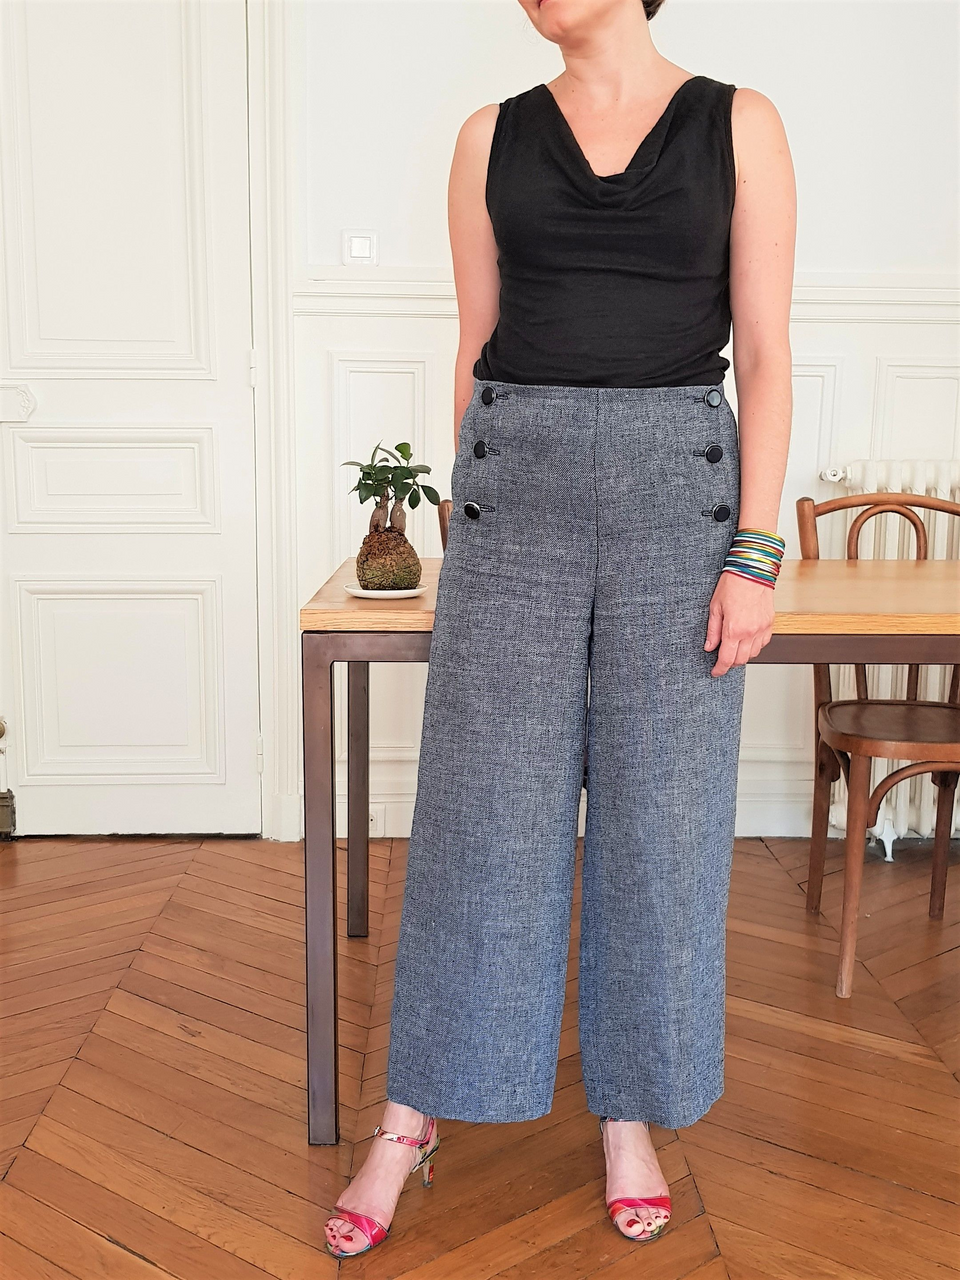 Chelsea Pant Sewing Pattern – Semi-formal Patterns – Style Arc